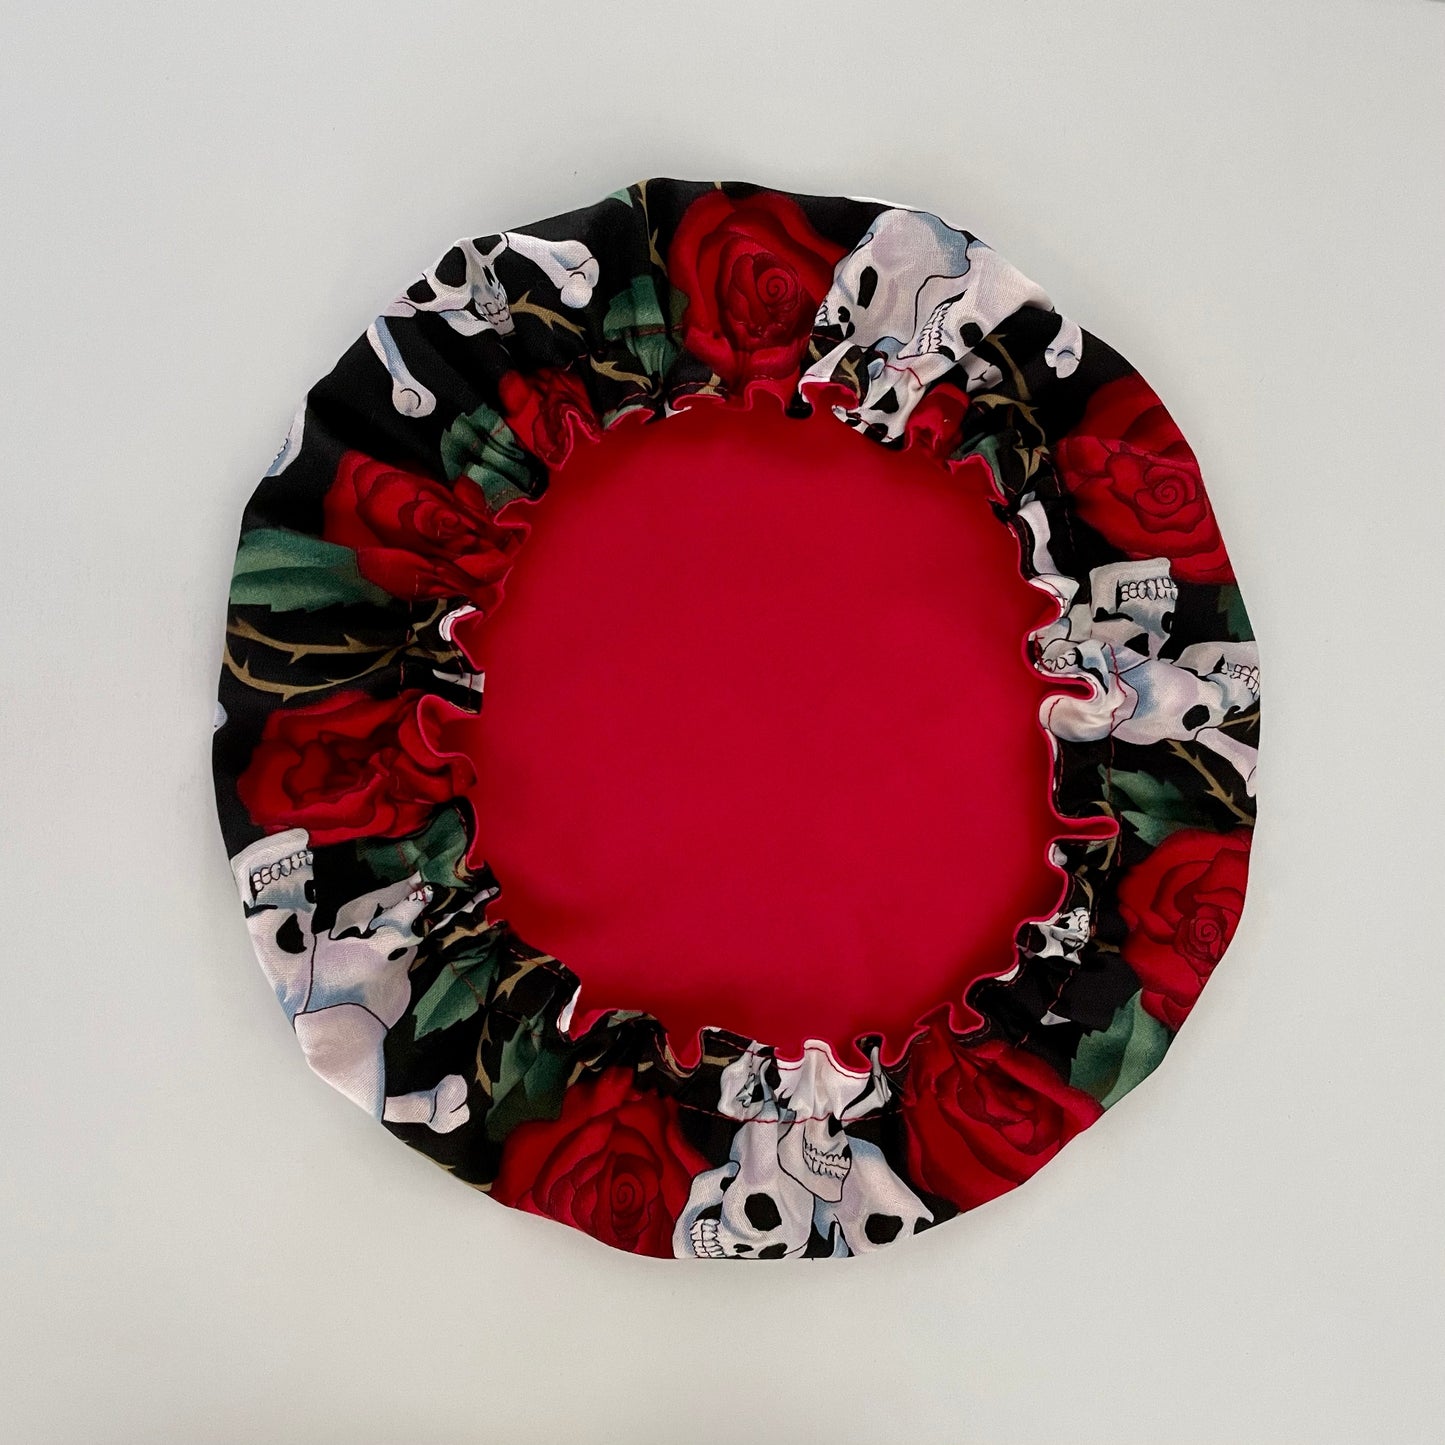 Stand Mixer Bowl Covers - Skulls and Roses